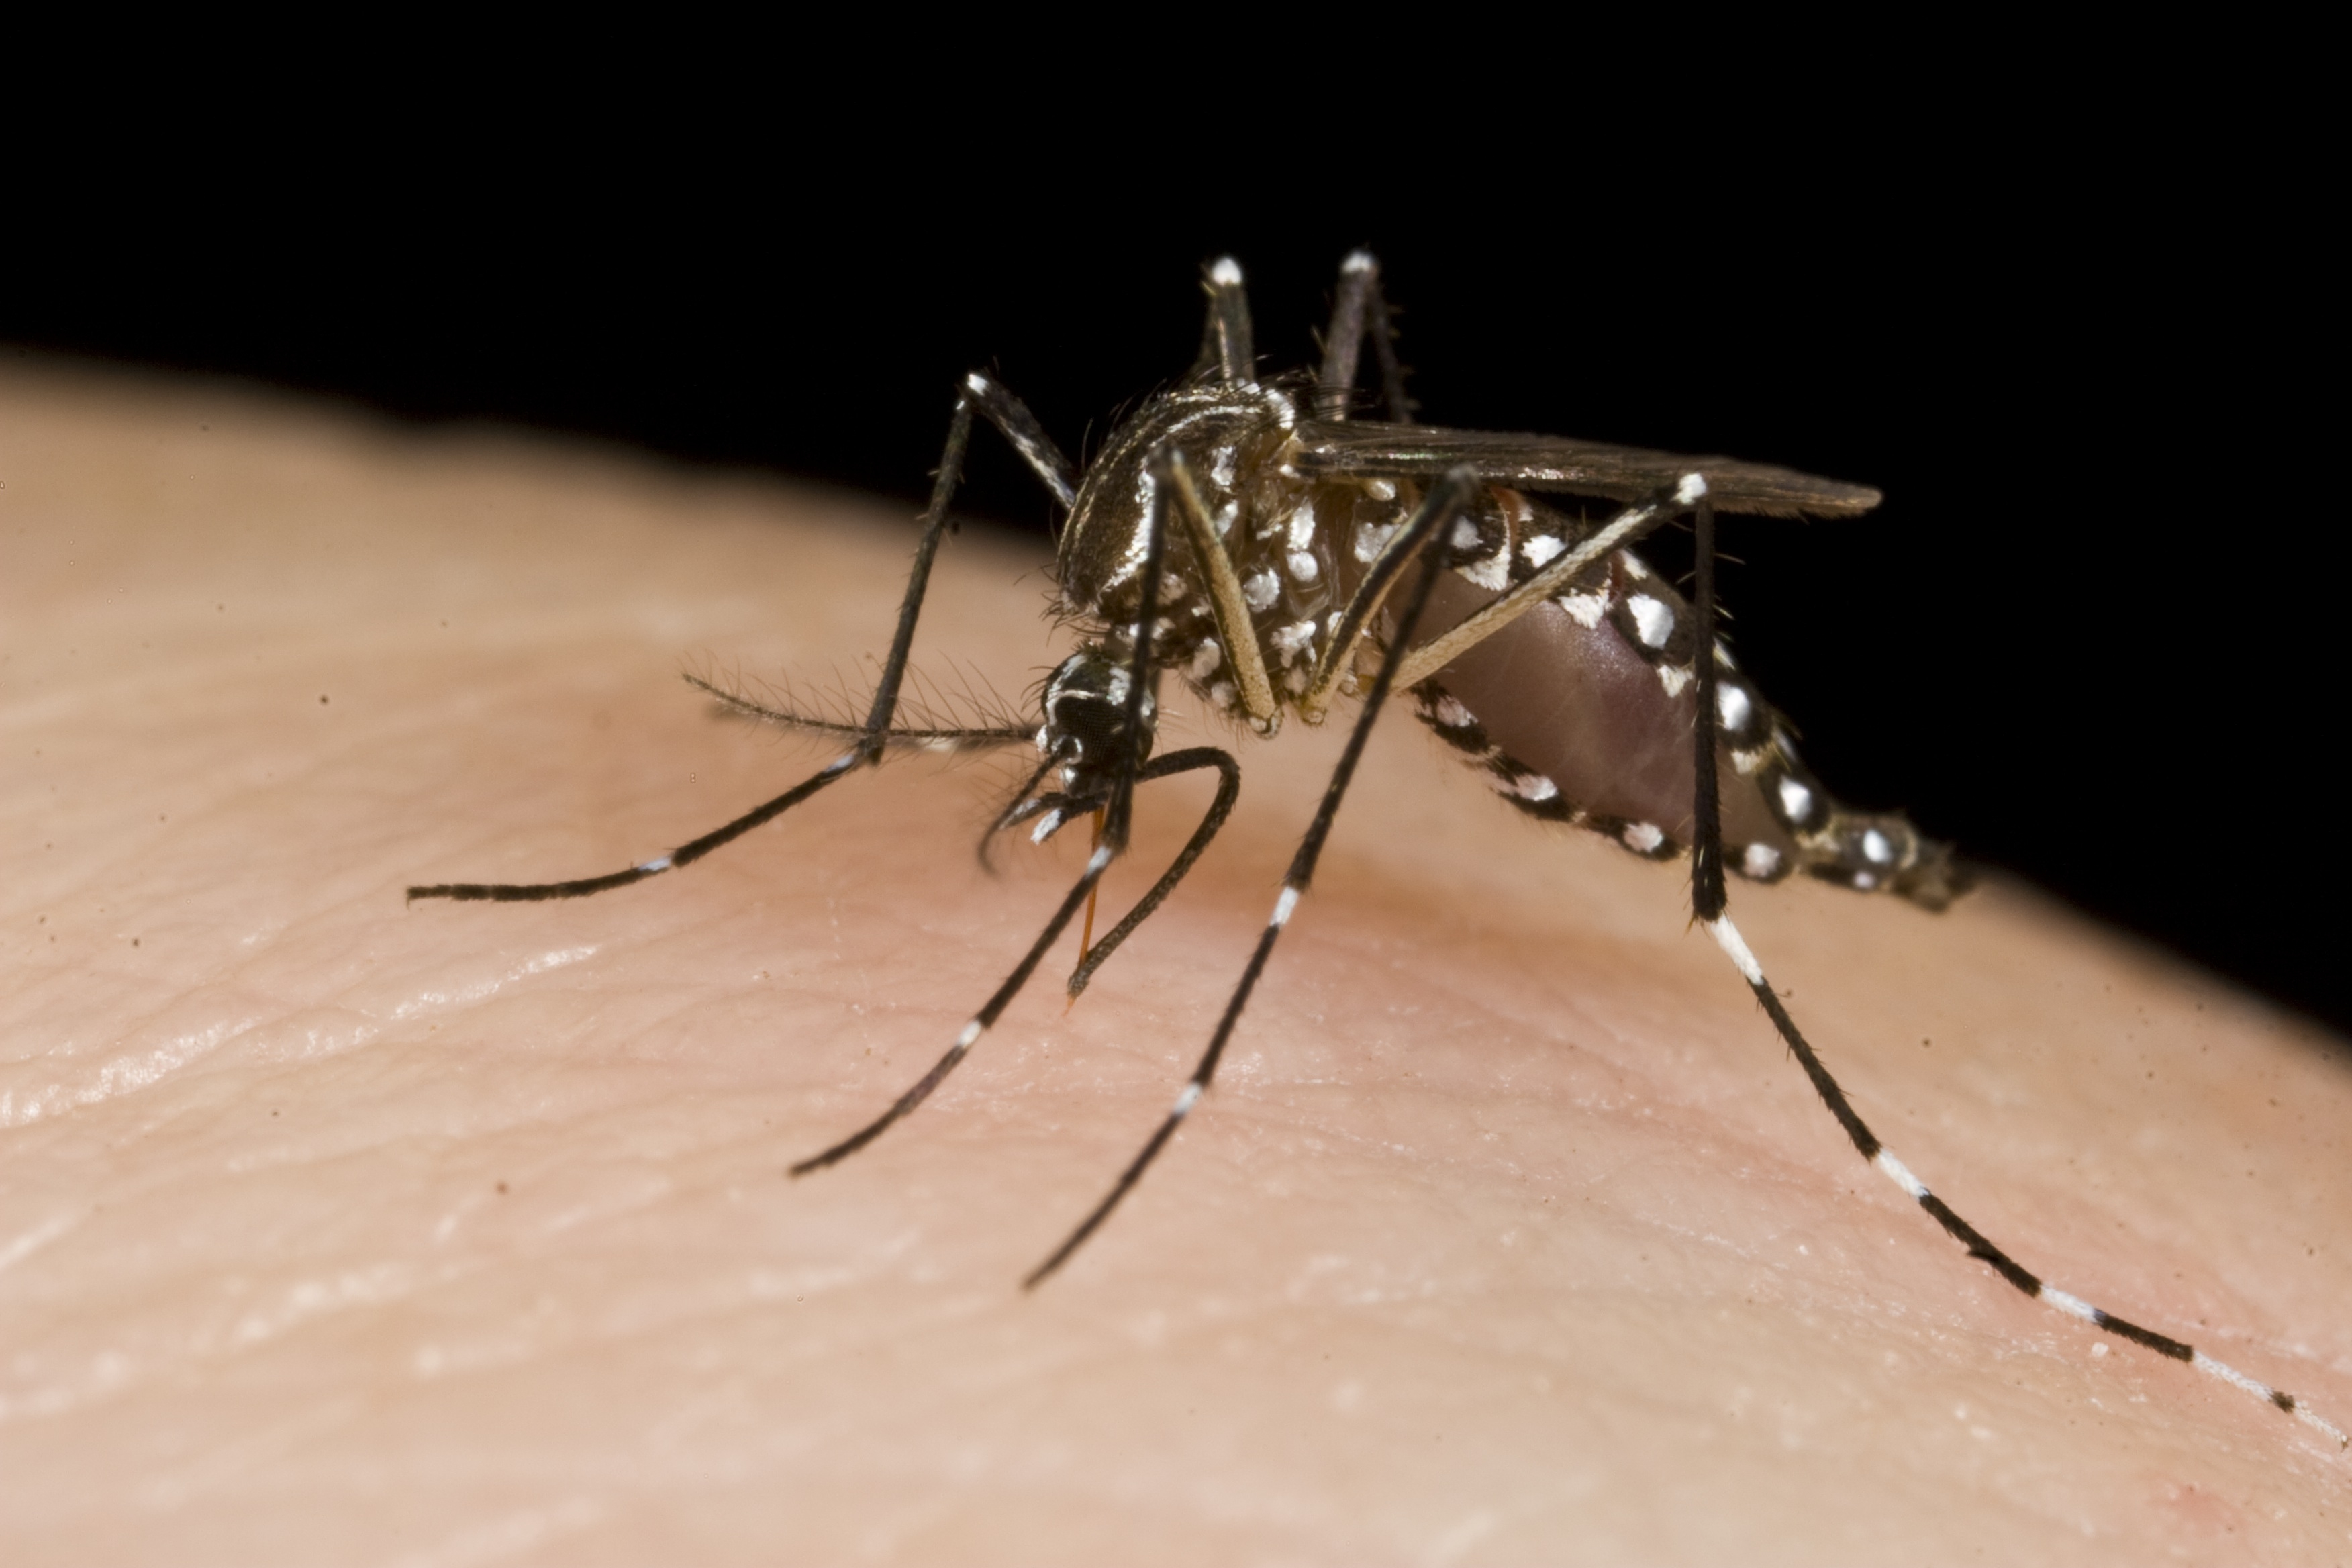 West Nile Virus is the most common mosquito-borne illness in America